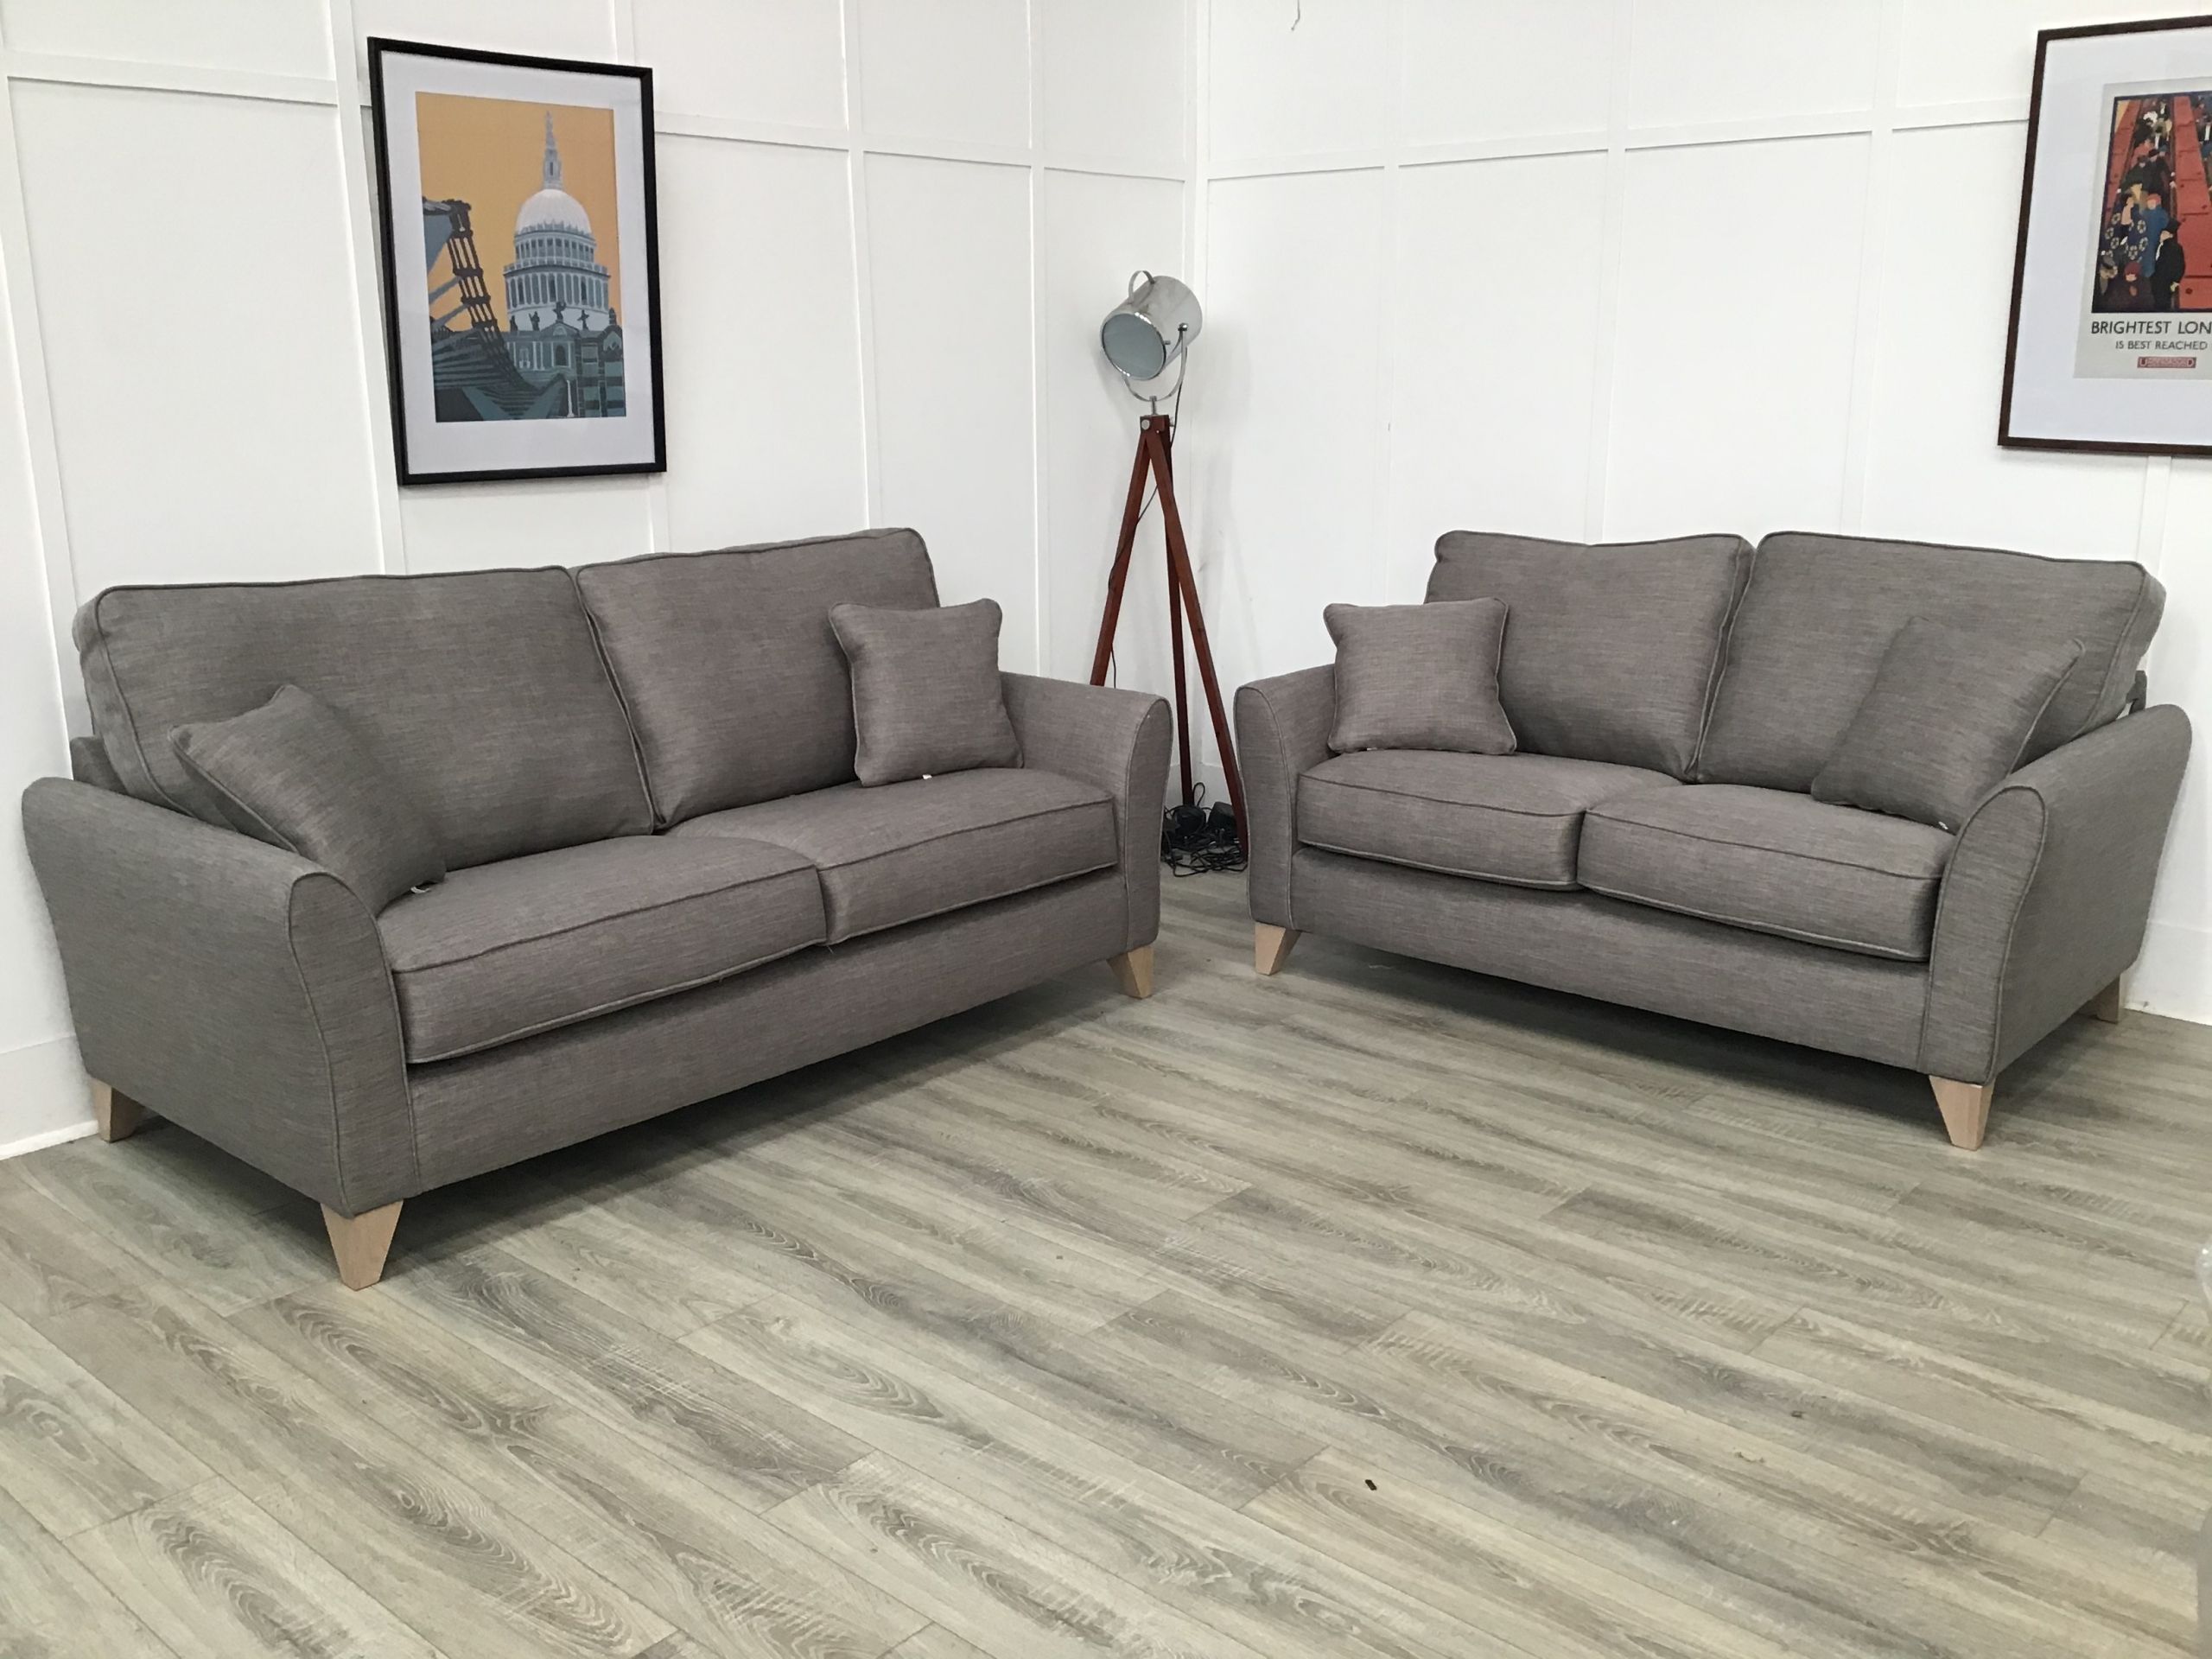 Fairfield 3 + 2 Seat Sofas In Dark Grey Fabric – Sofa Giant With Sofas In Dark Grey (View 11 of 15)